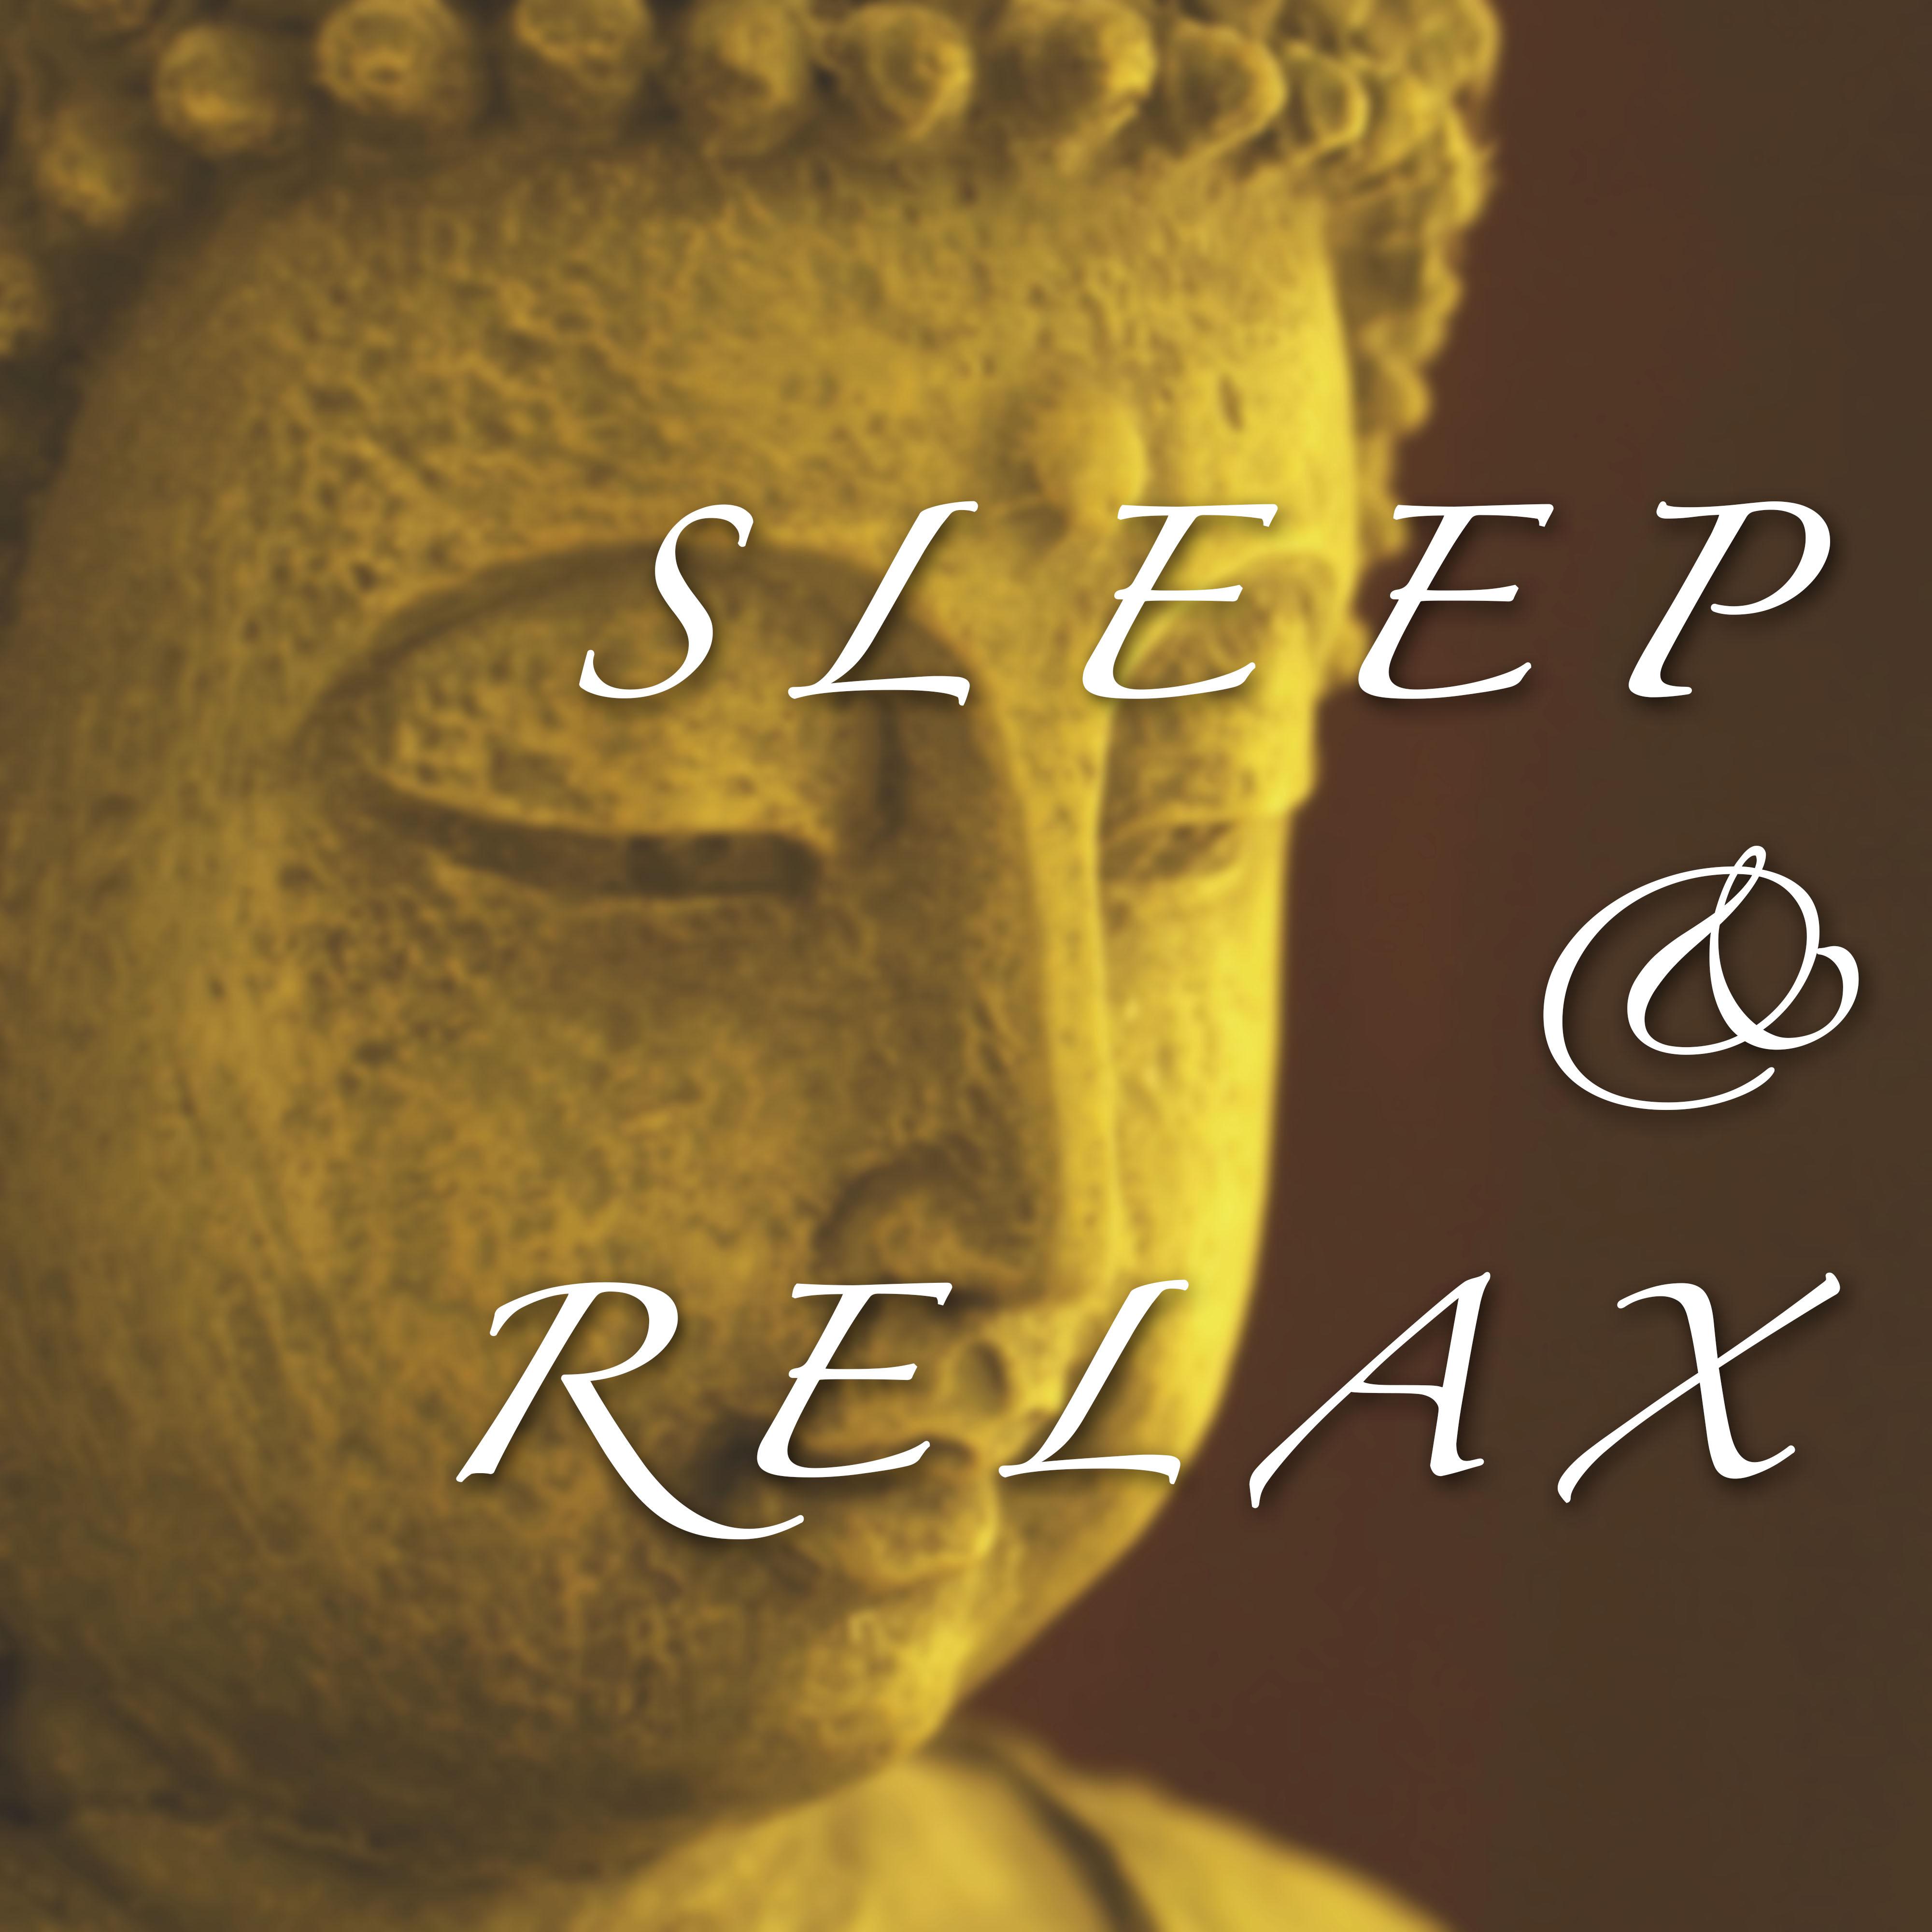 Sleep & Relax - Let Us Soothe You into a State of Relaxation